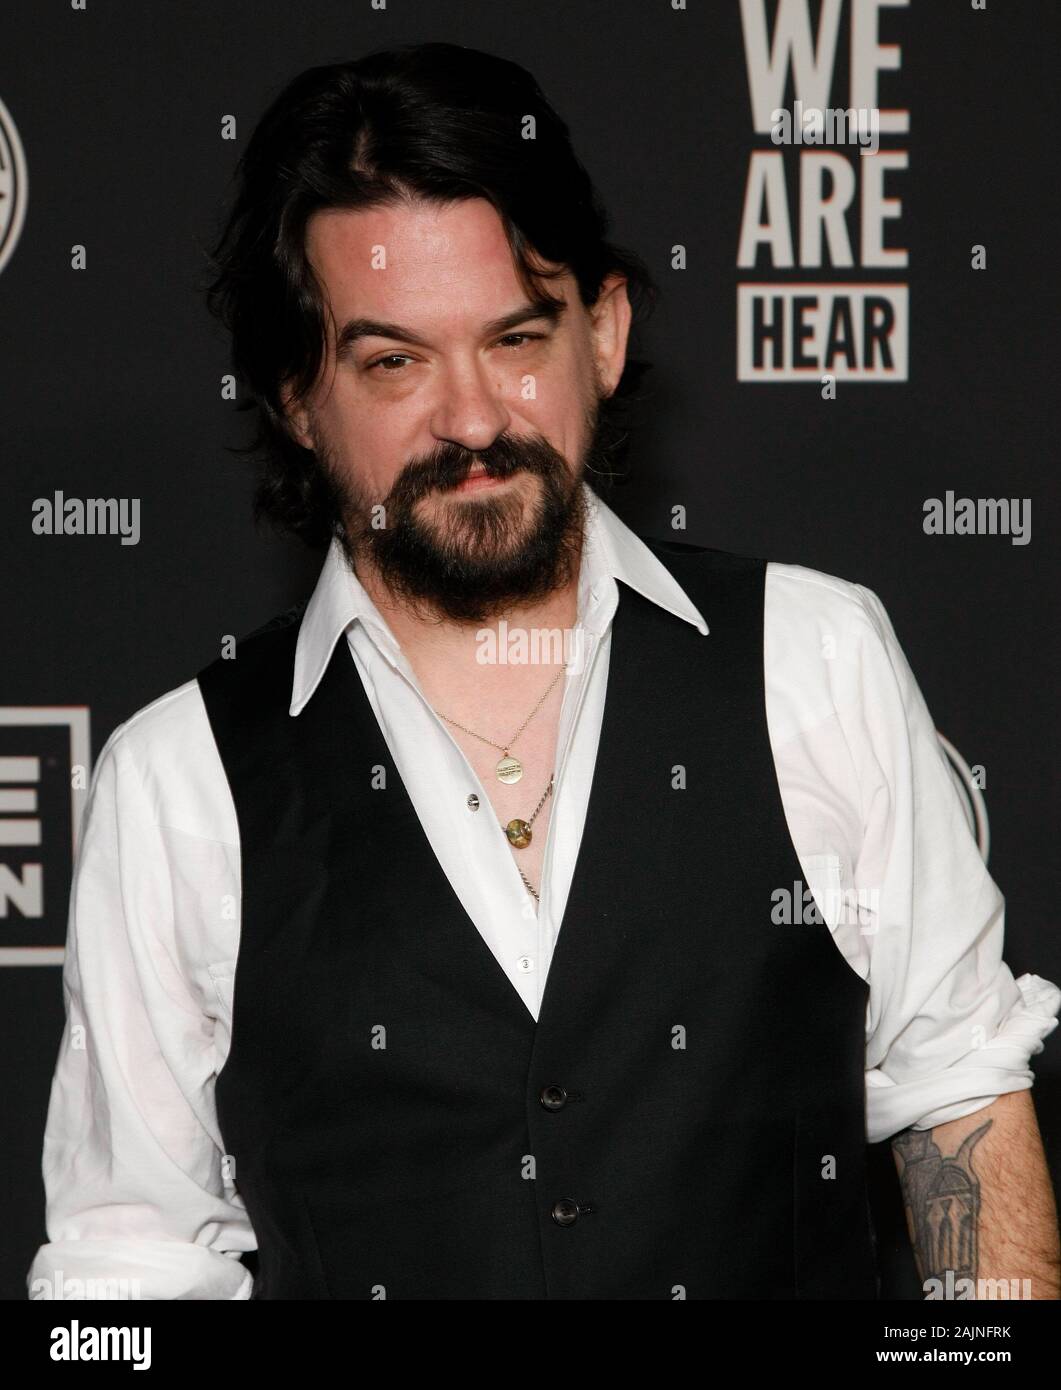 Los Angeles, USA. 04th Jan, 2020. LOS ANGELES, CALIFORNIA - JANUARY 04: Shooter Jennings attends The Art Of Elysium's 13th Annual Celebration - Heaven at Hollywood Palladium on January 04, 2020 in Los Angeles, California. Credit: MediaPunch Inc/Alamy Live News Stock Photo